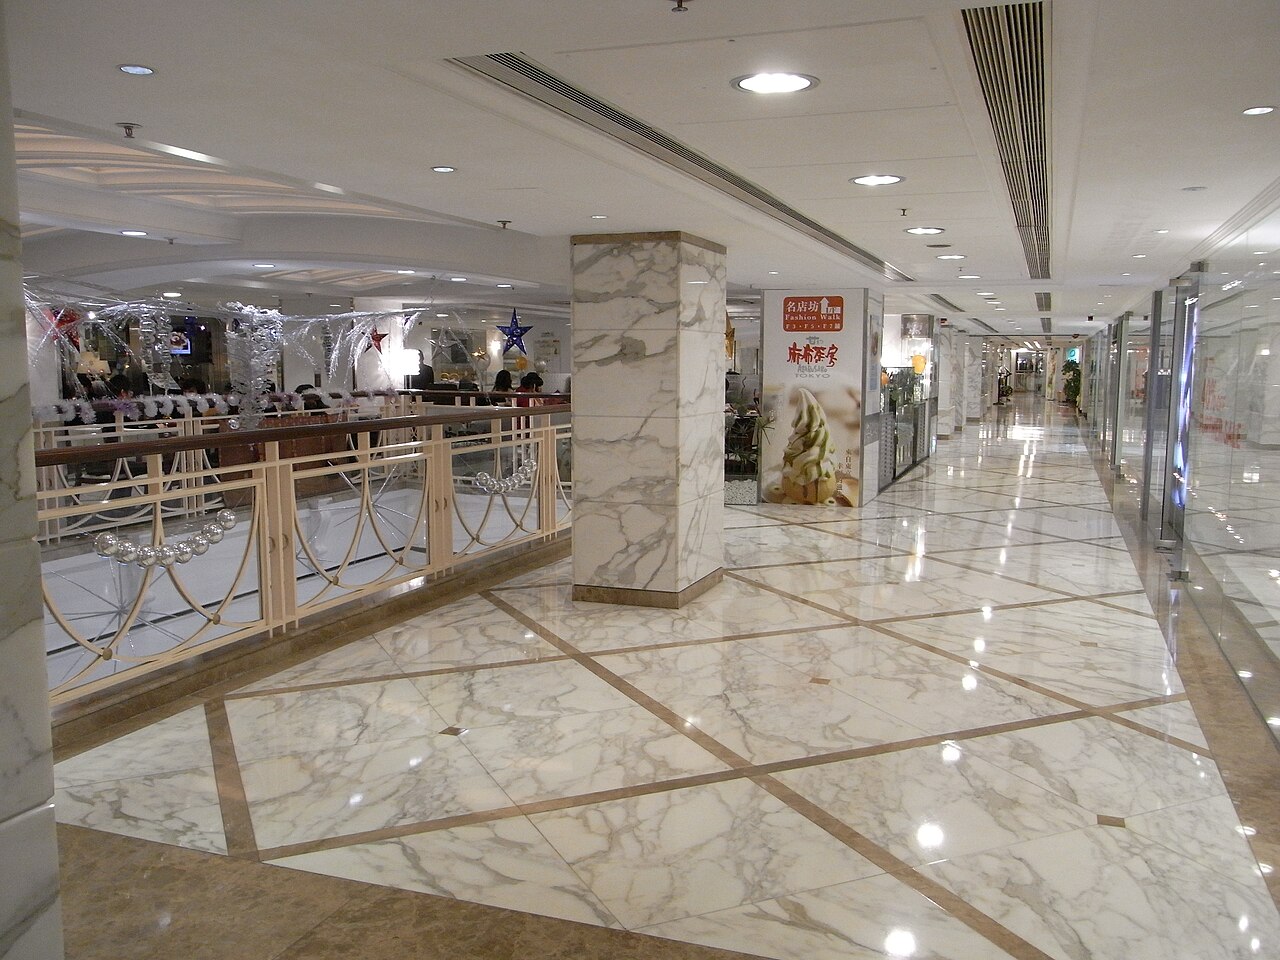 Image of a marble floor